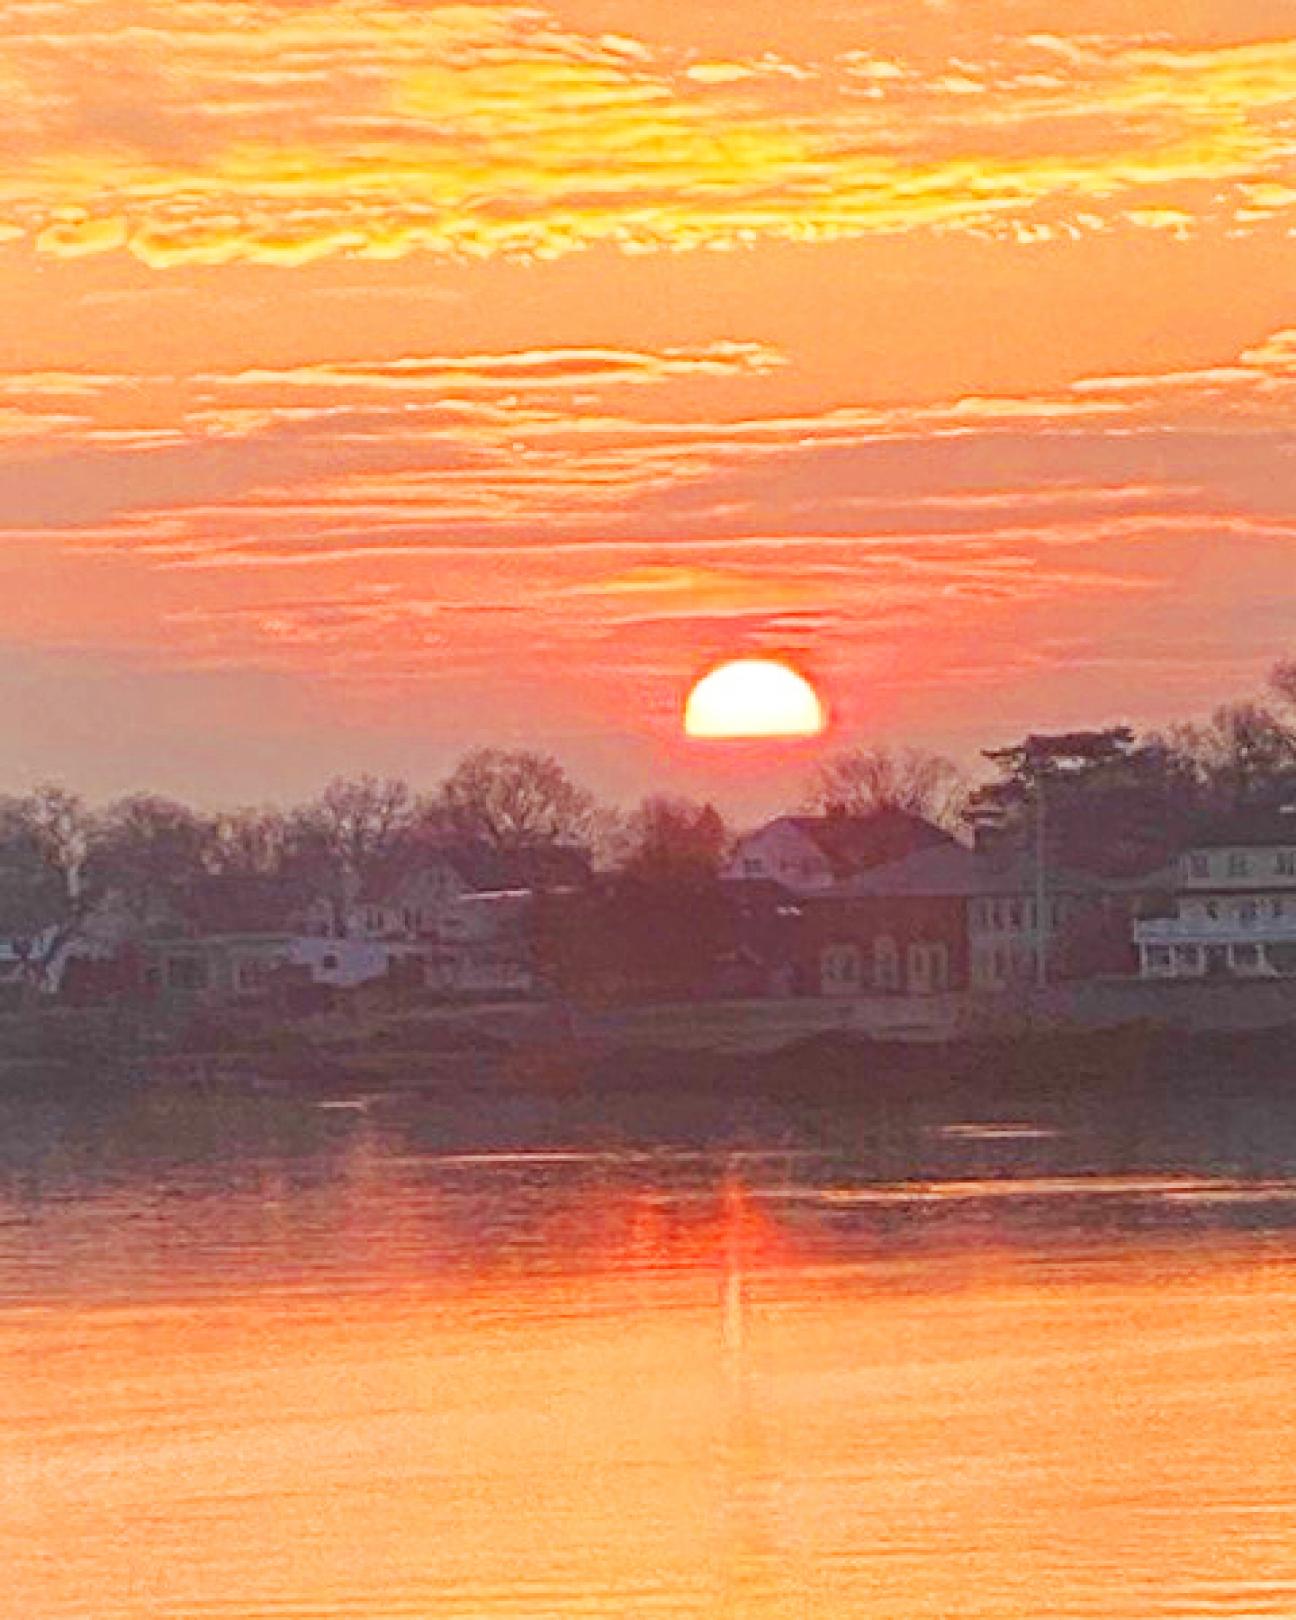 The sunset over Long Island Sound in Connecticut